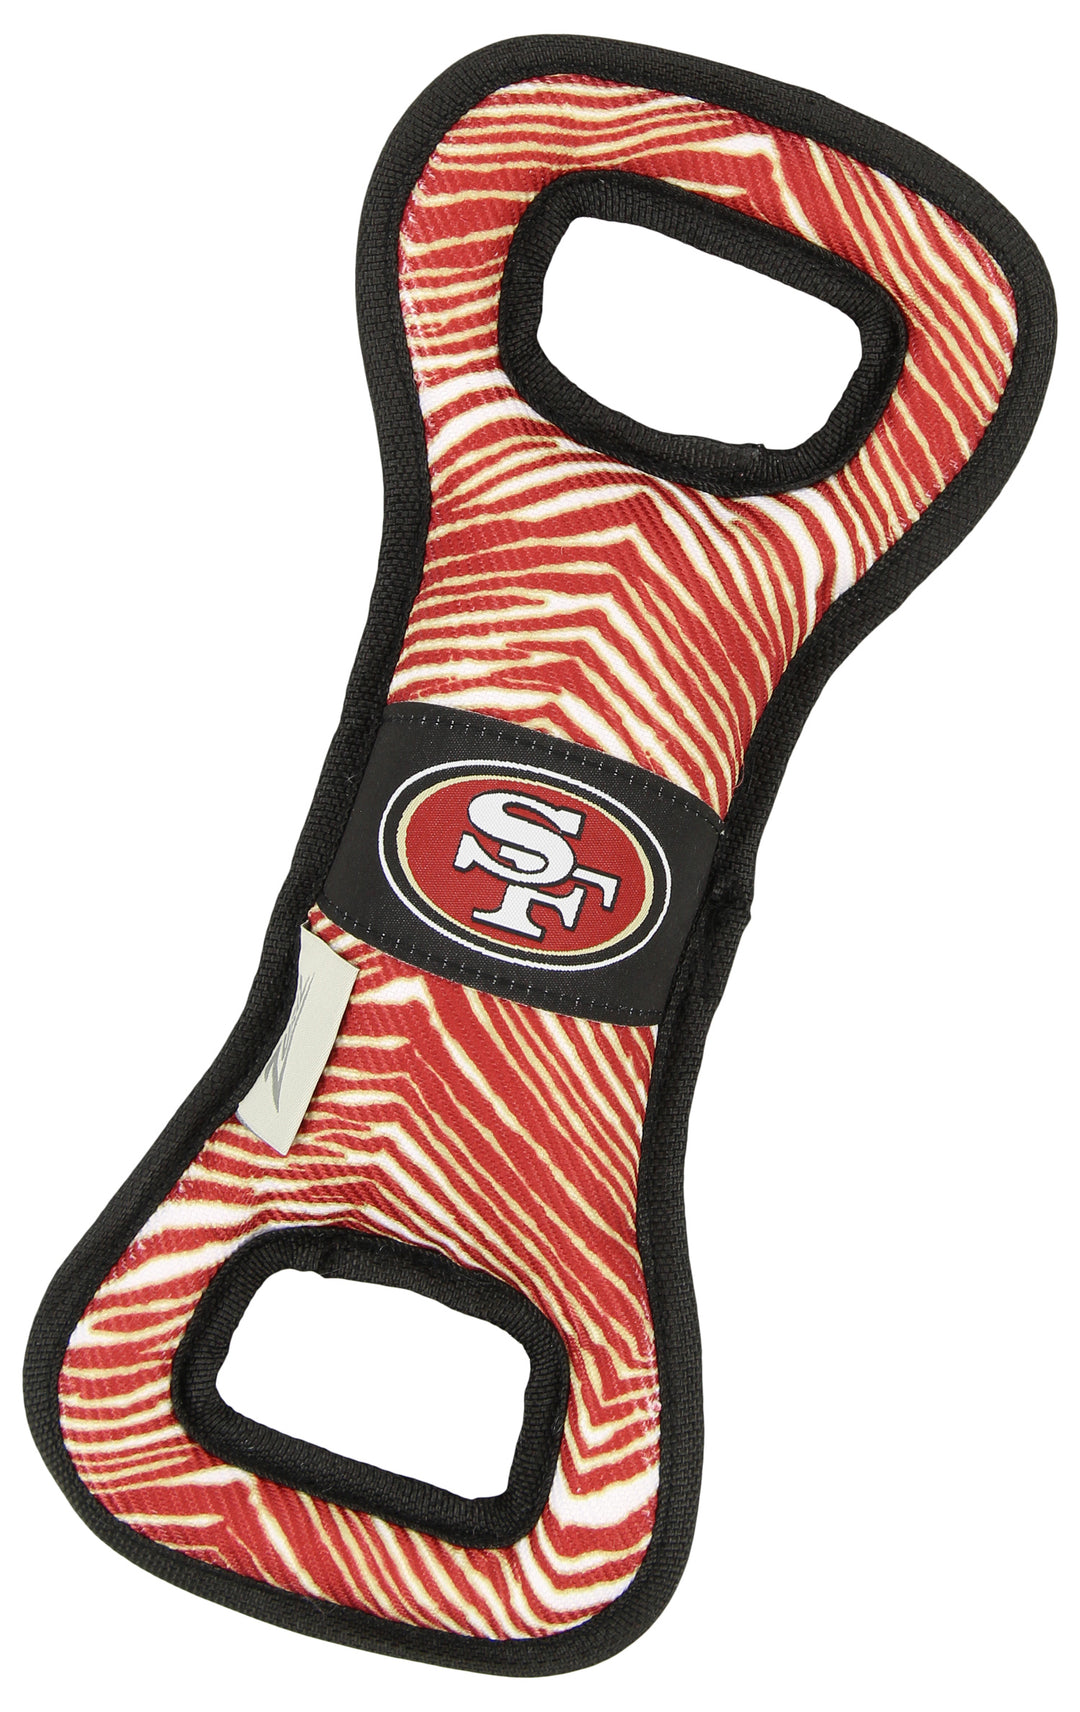 Zubaz X Pets First NFL San Francisco 49Ers Team Logo Dog Tug Toy with Squeaker